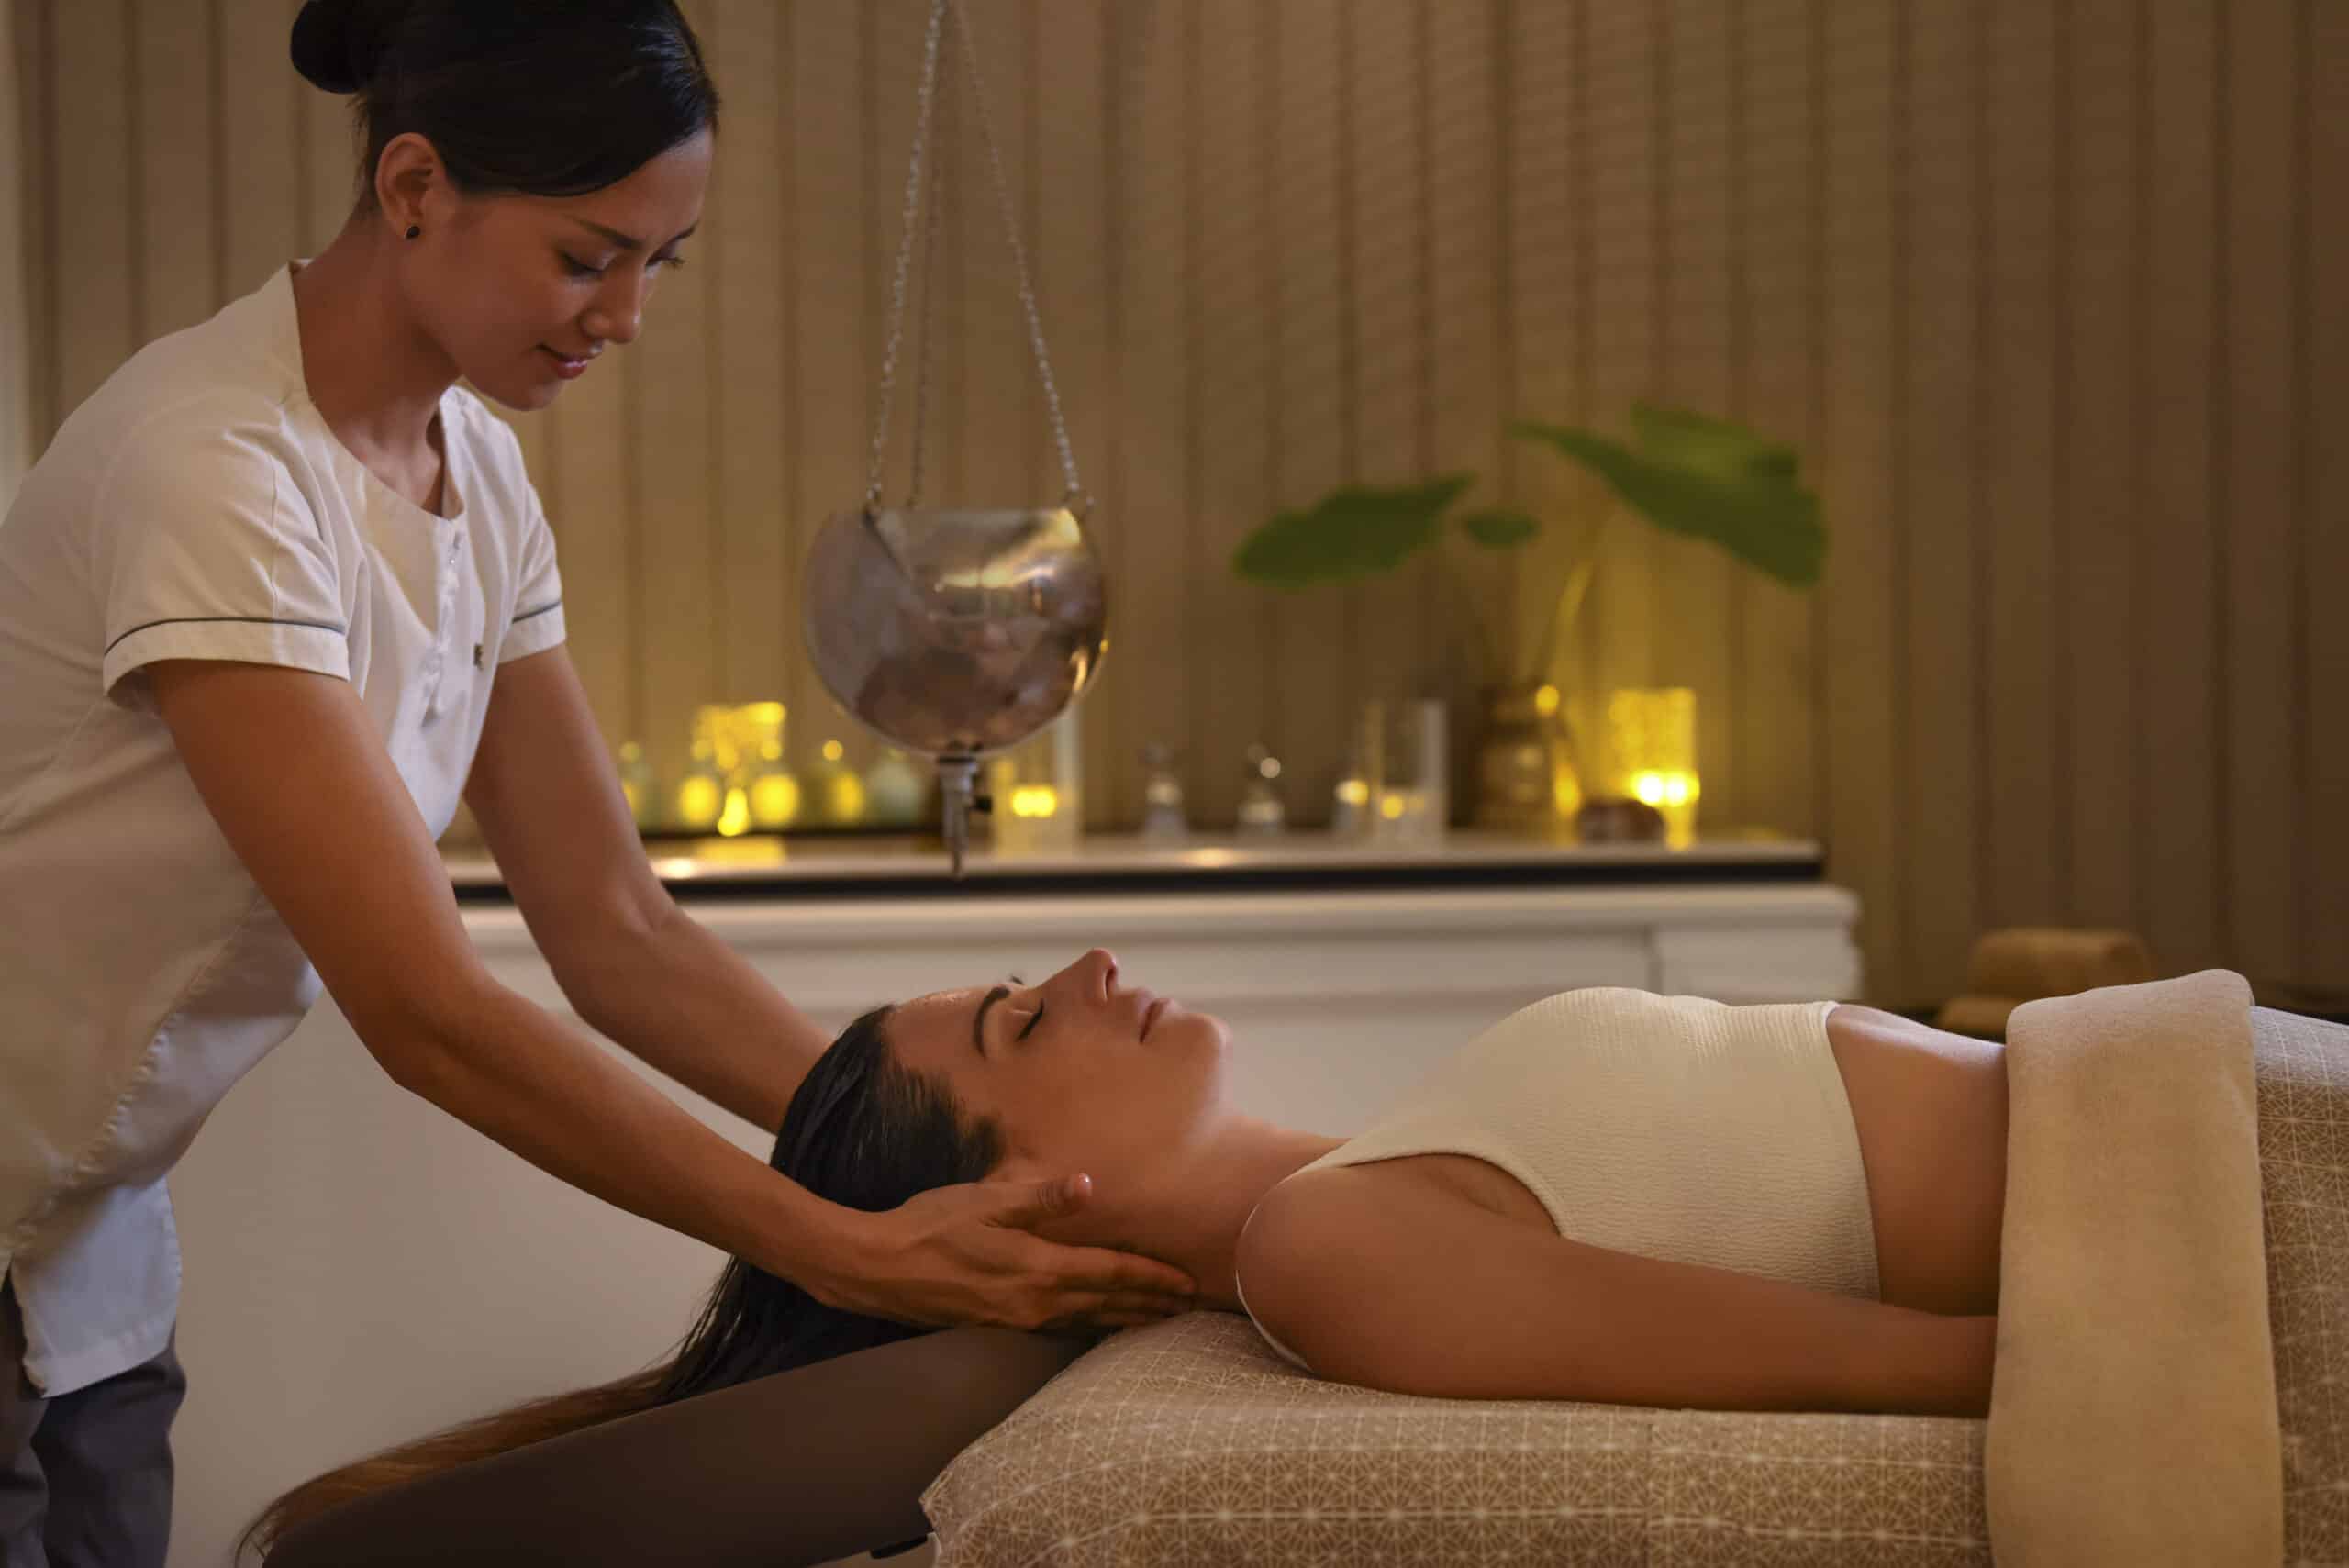 REVIVIFY WITH EXCLUSIVE LIMITED-TIME BESPOKE REMODELING FACE TREATMENTS CRAFTED BY IRIDIUM SPA, ST. REGIS MALDIVES, AND BIOLOGIQUE RECHERCHE